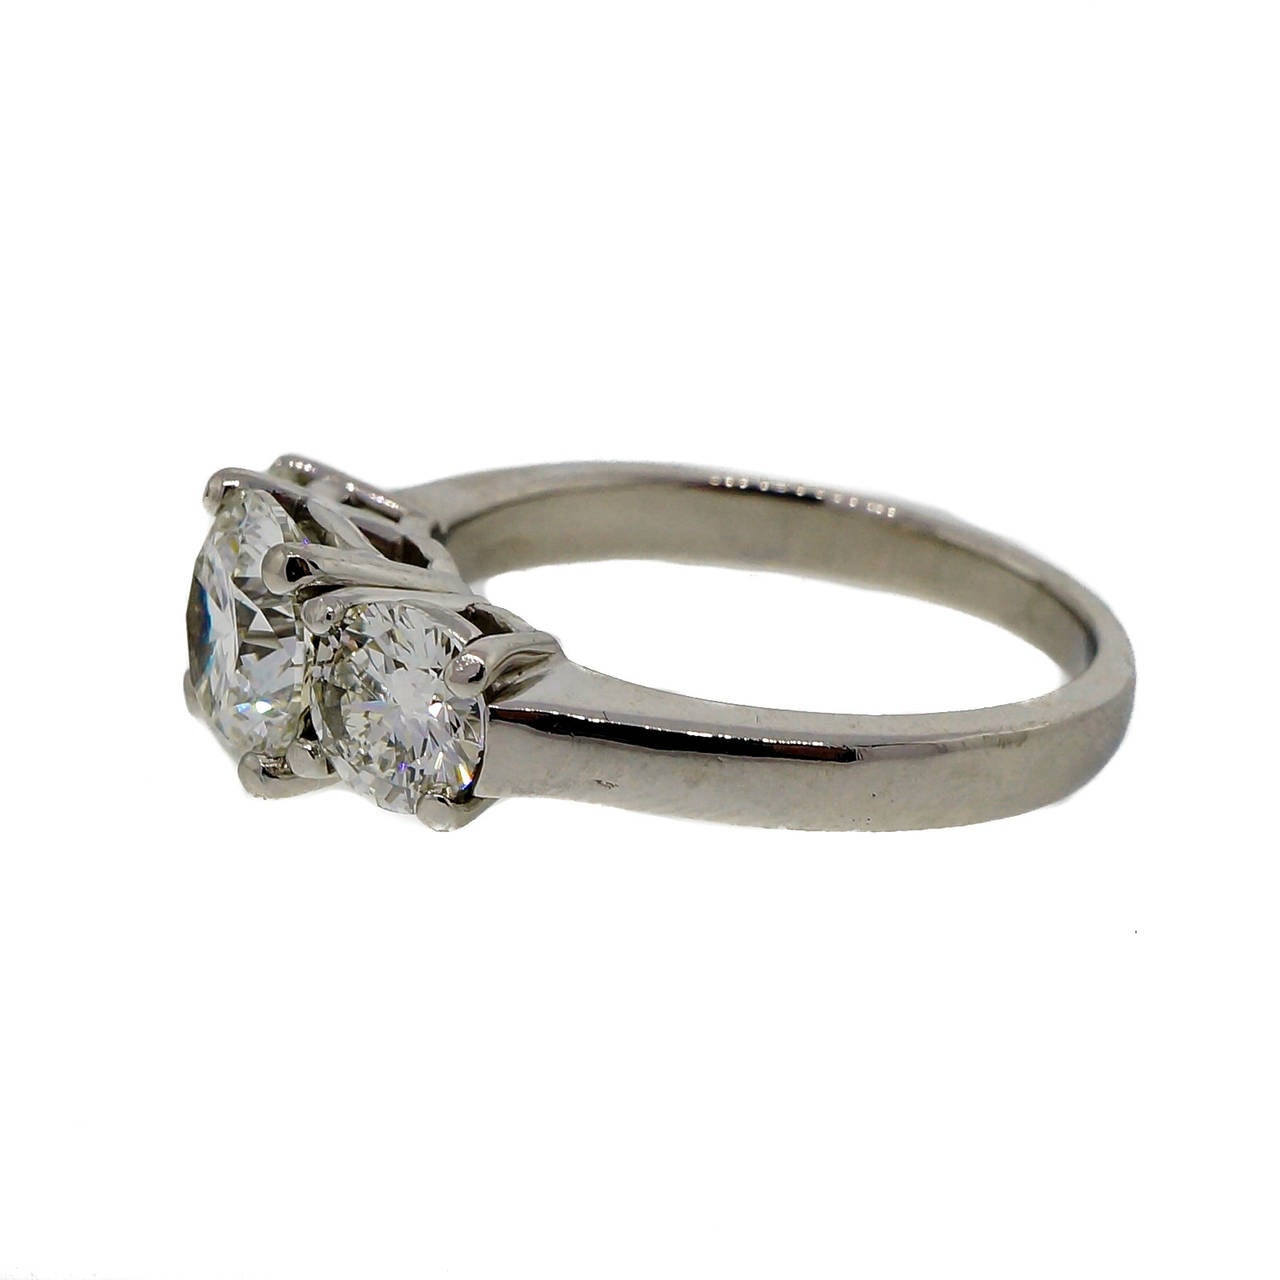 Classic solid Platinum set low to the finger 3 stone diamond ring made with quality, not quantity, in mind. Bright sparkly G, VS2 diamonds. The diamonds are from an estate. The setting is from the Peter Suchy Workshop. PSD. 

1 round brilliant cut